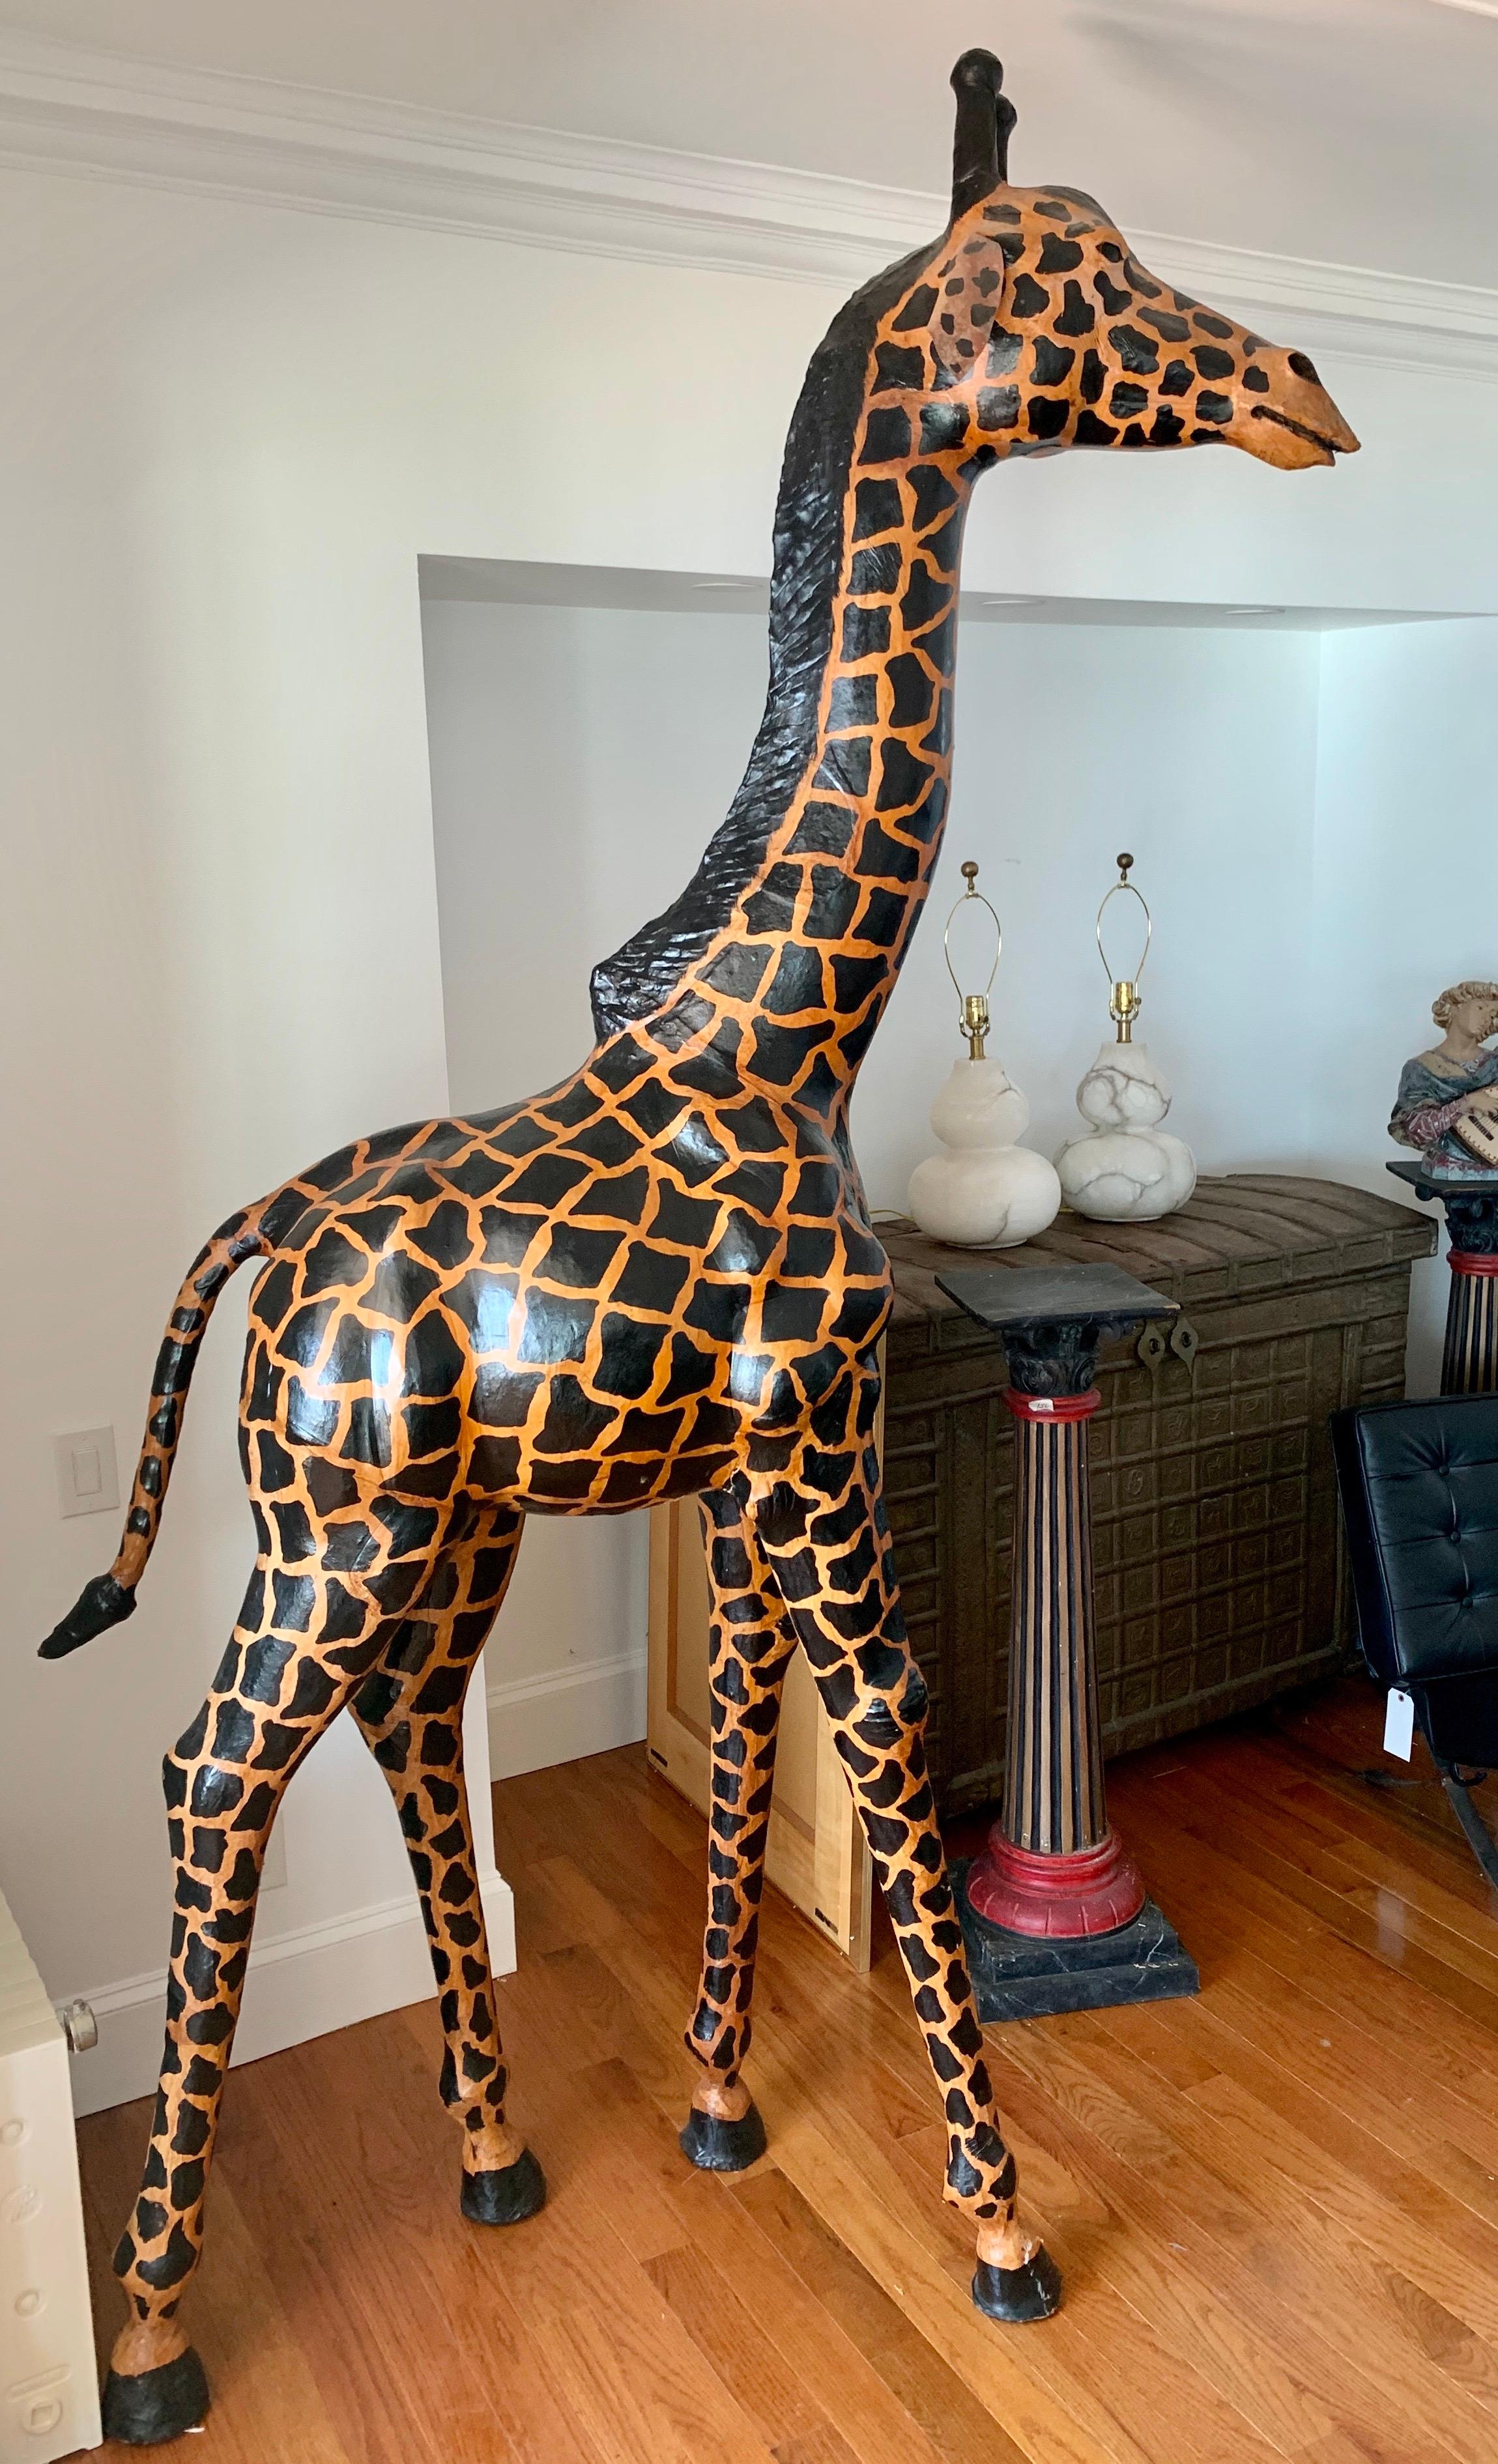 Large Life-Size Leather Giraffe Sculpture Almost Nine Feet Tall 5